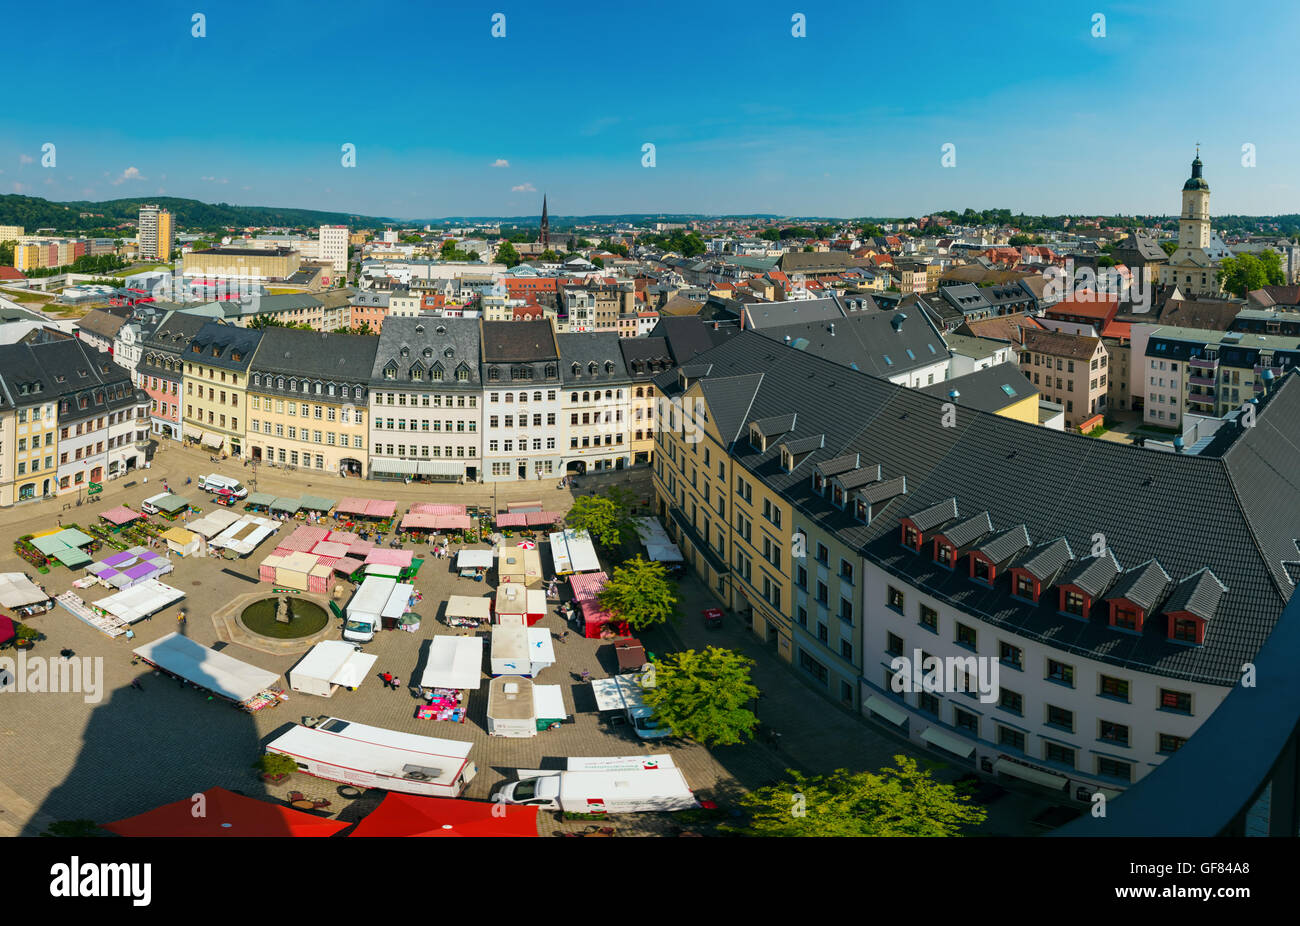 MUNICH, GERMANY - JULY 15, 2015: Aerial view from the marketplace in Munich. Munuch is the capital and largest city of the Germa Stock Photo